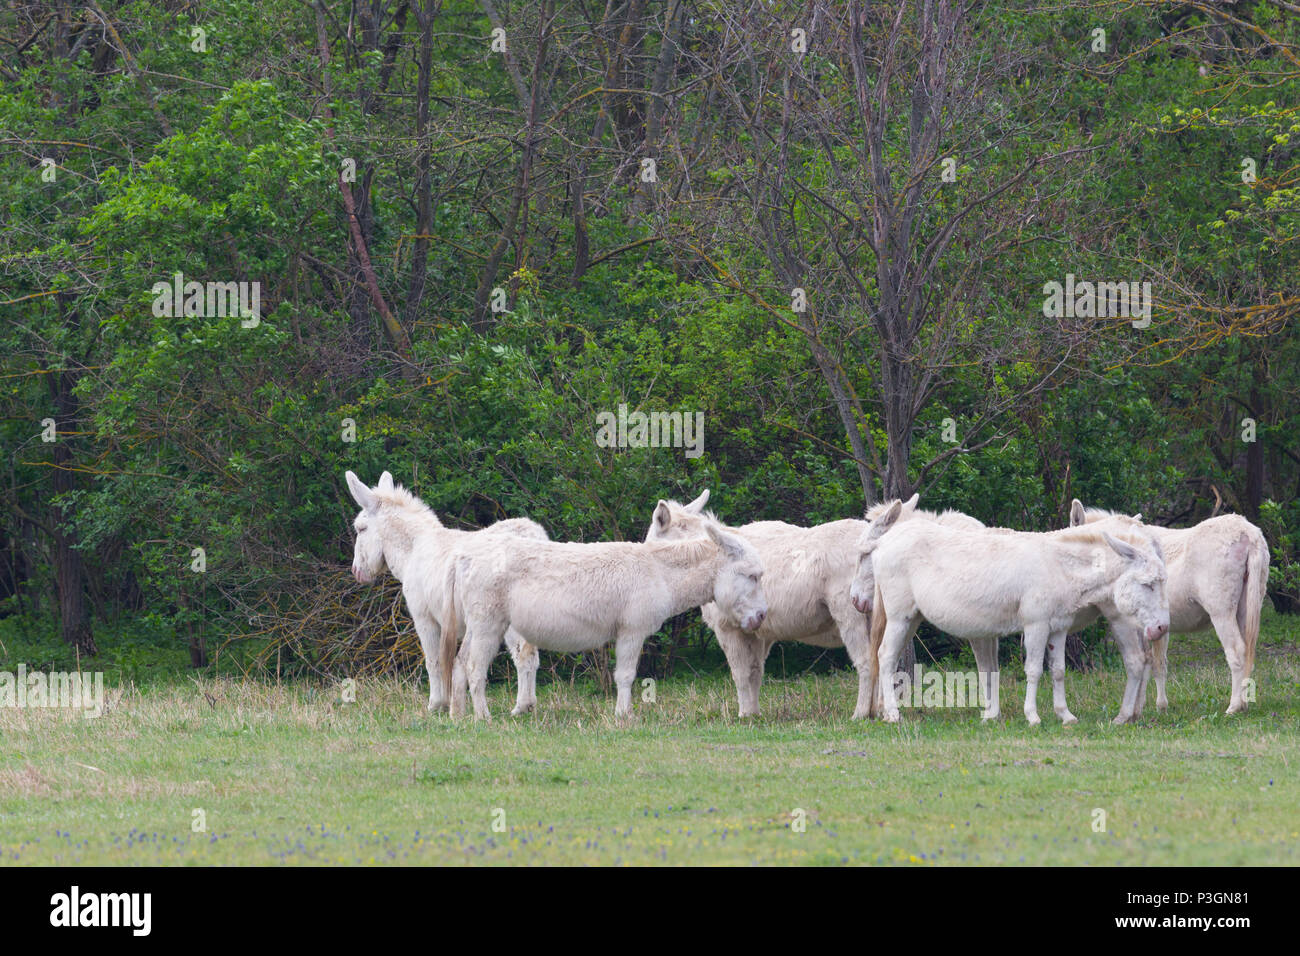 group of natural white donkeys standing in grassland Stock Photo